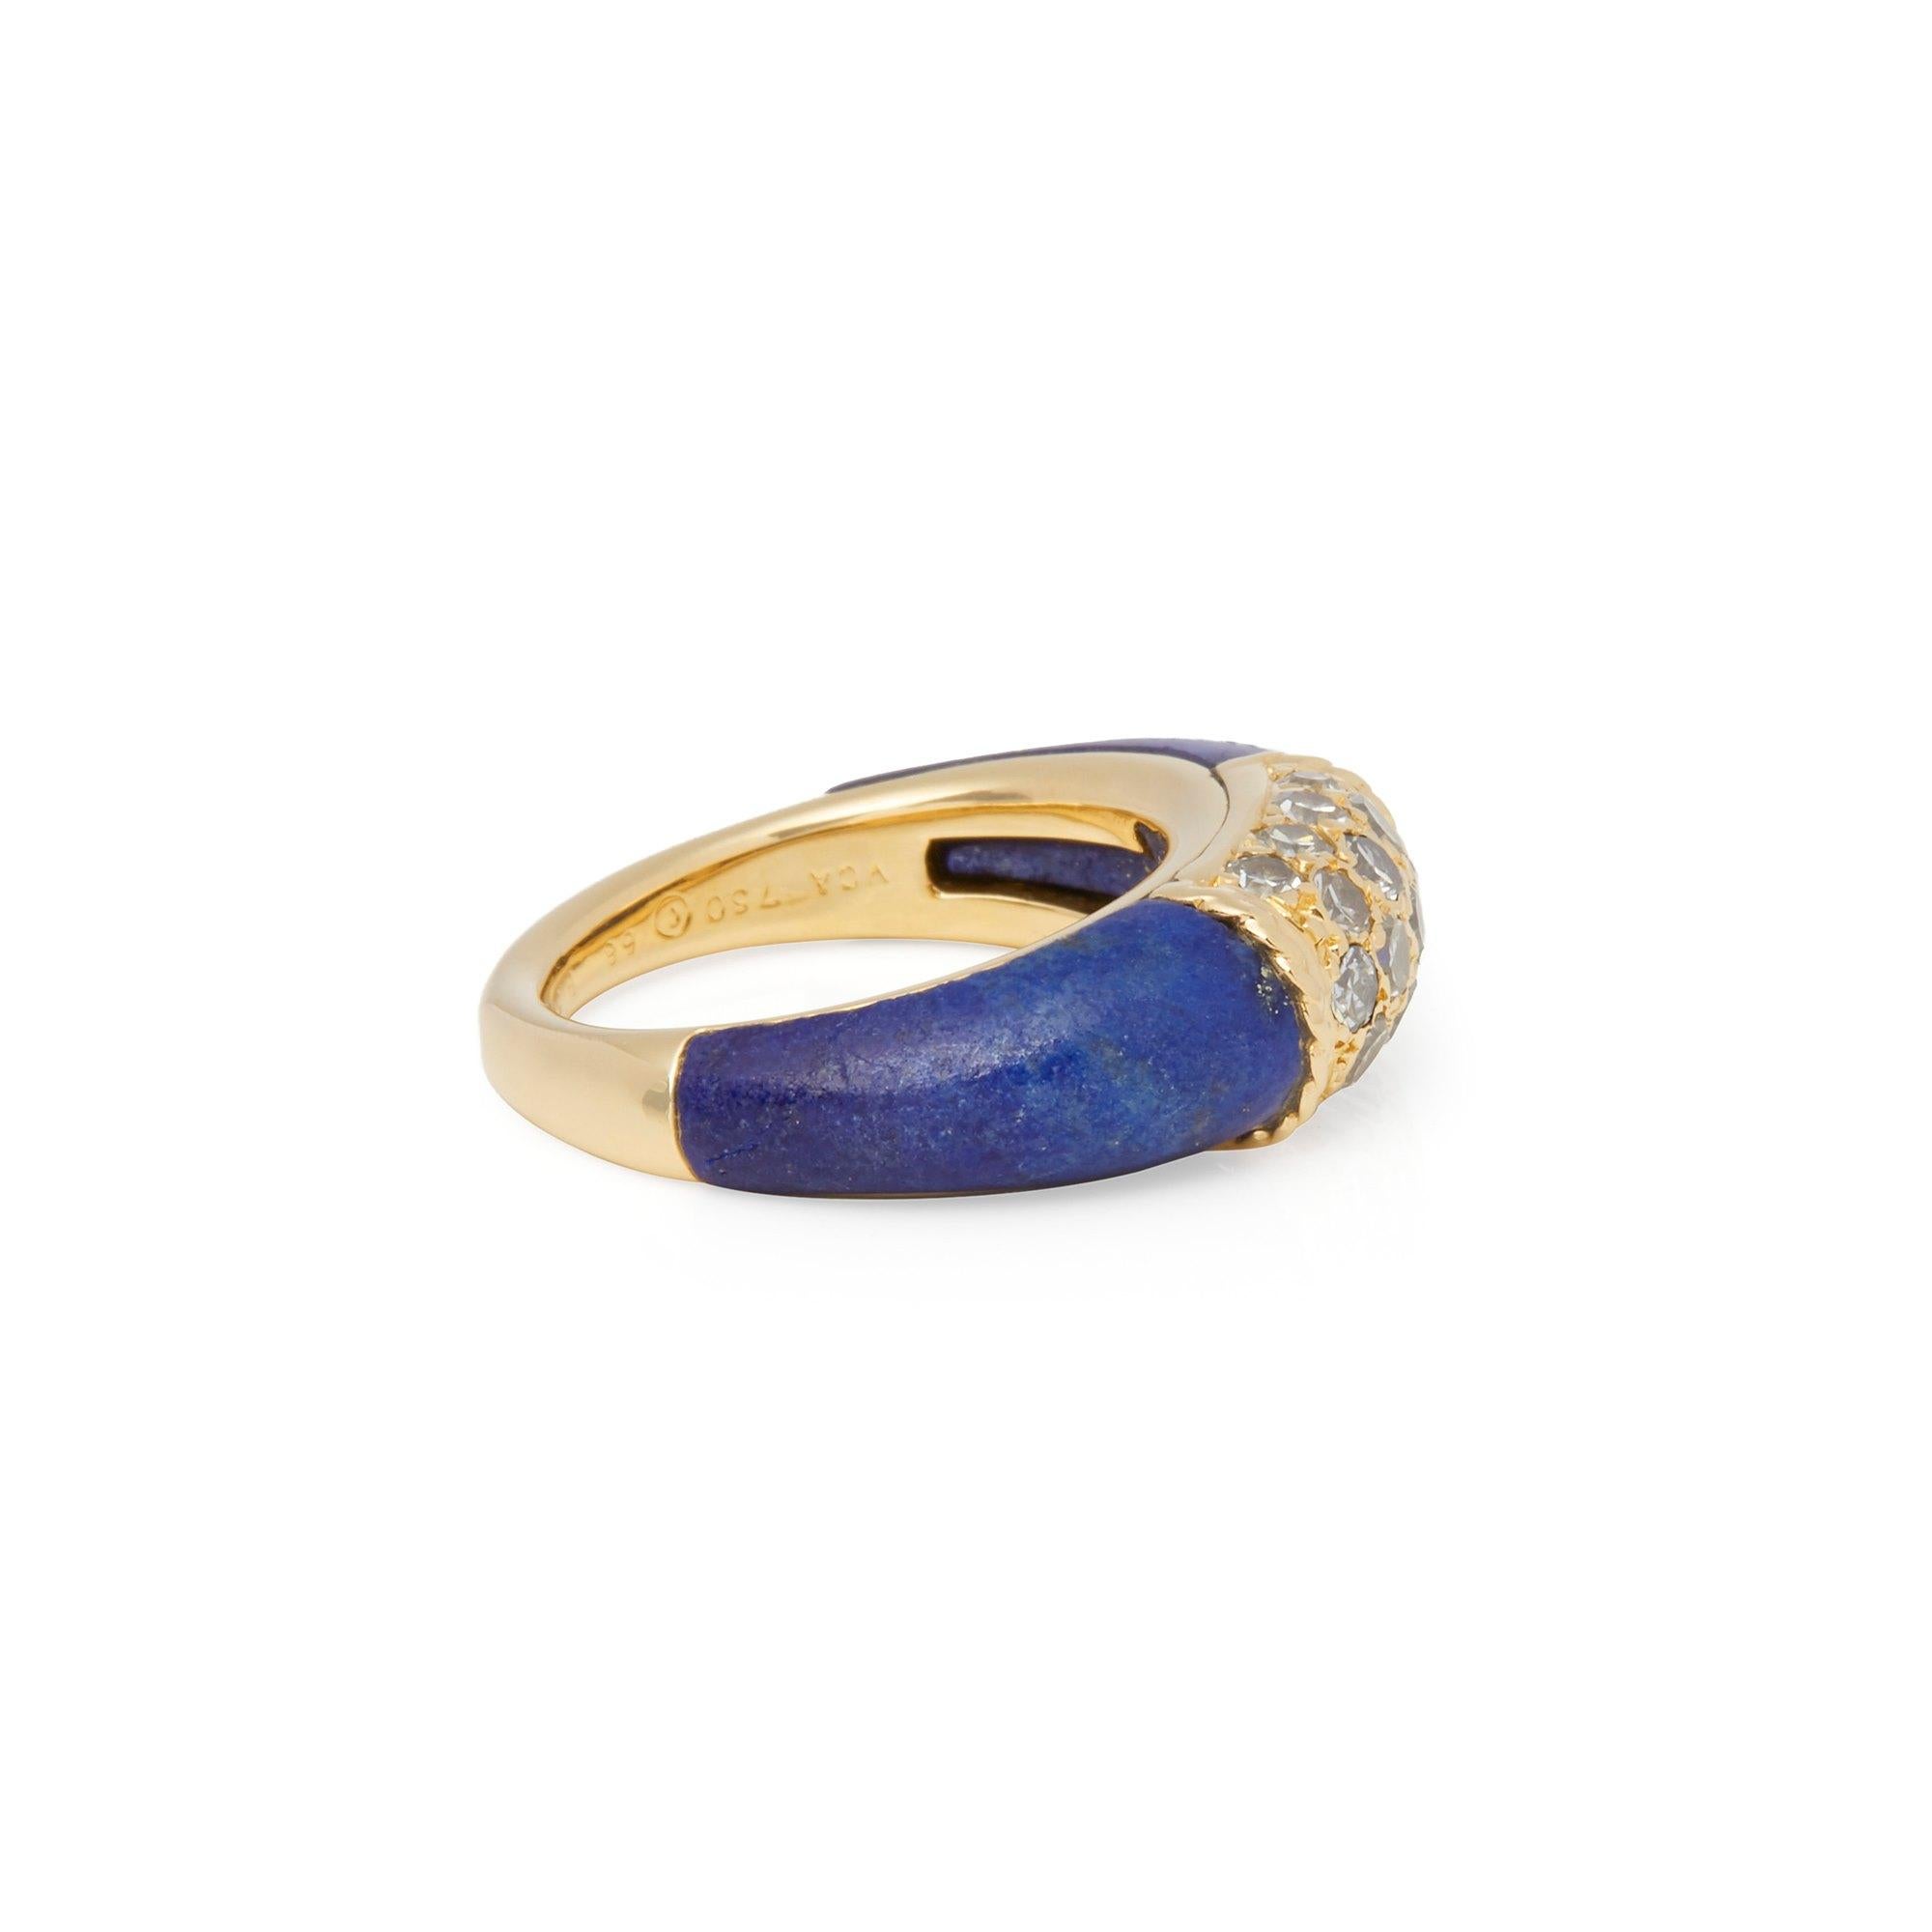 Contemporary Van Cleef & Arpels 18 Karat Yellow Gold Lapis and Diamond Philippine Ring For Sale